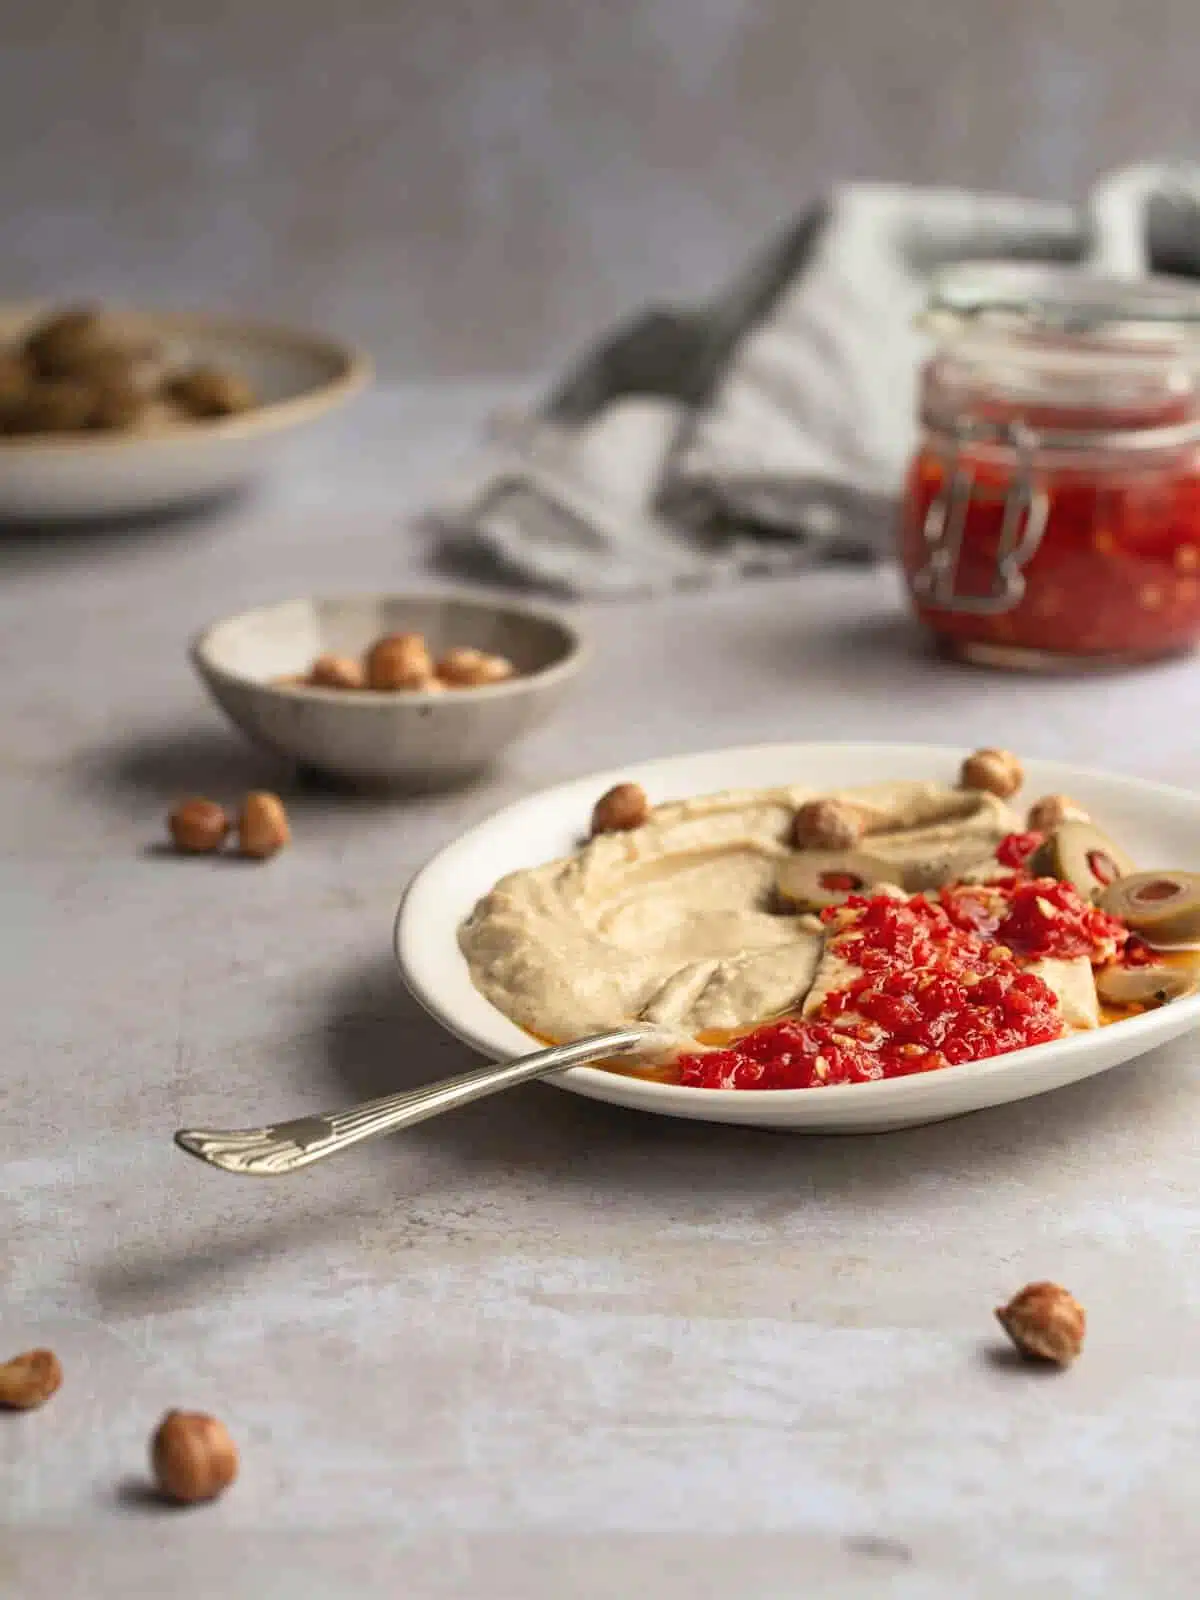 Hummus, olives and chilli sauce on a plate.